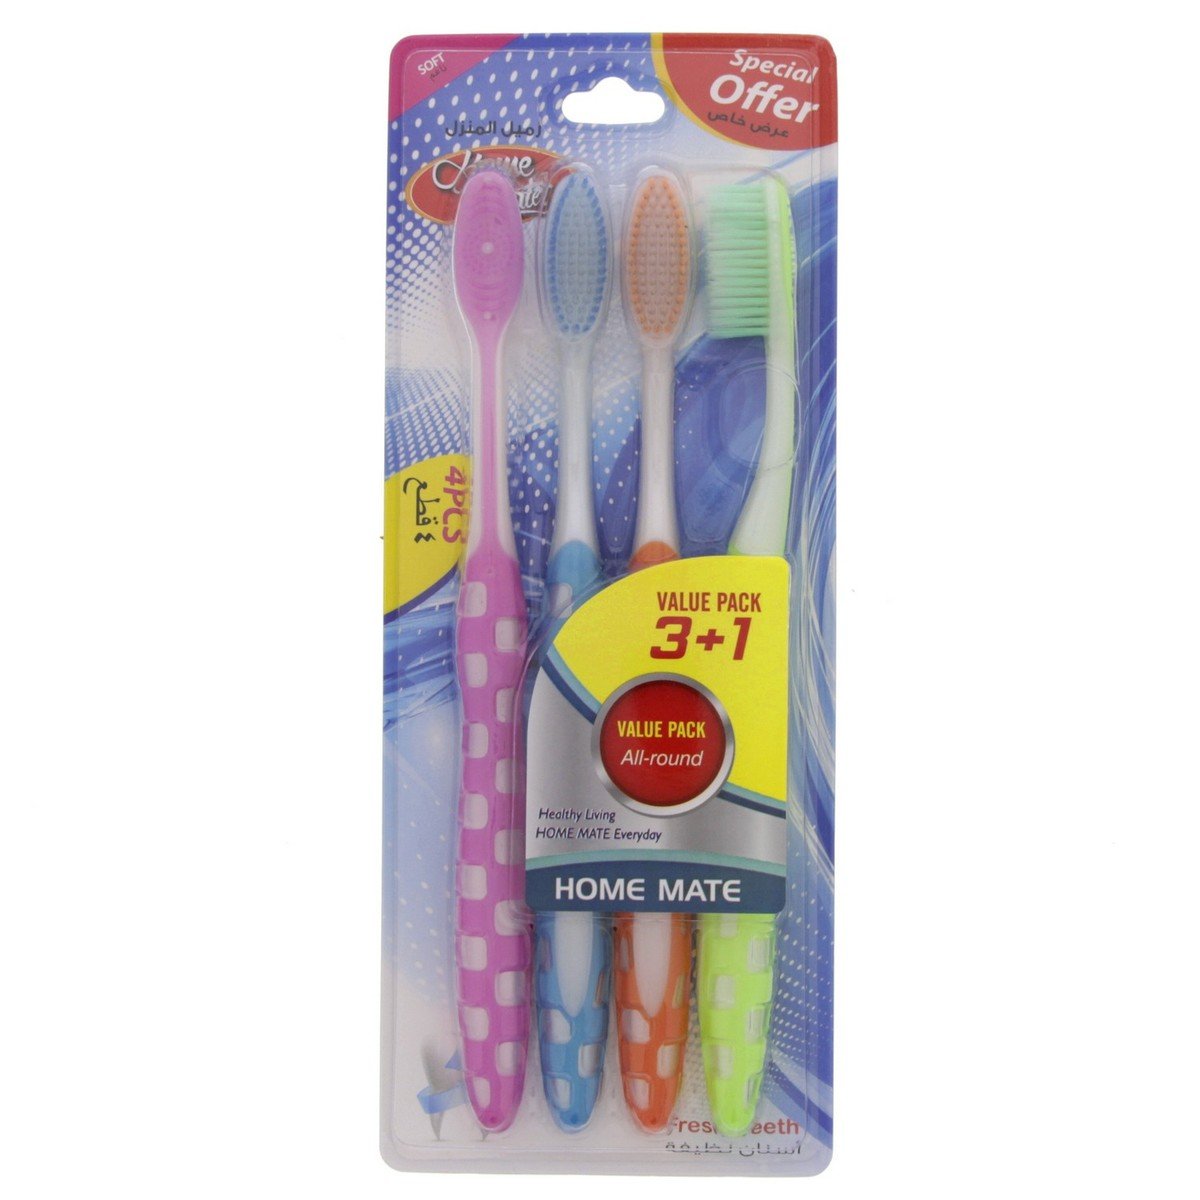 Home Mate Soft Toothbrush N818-4 3+1